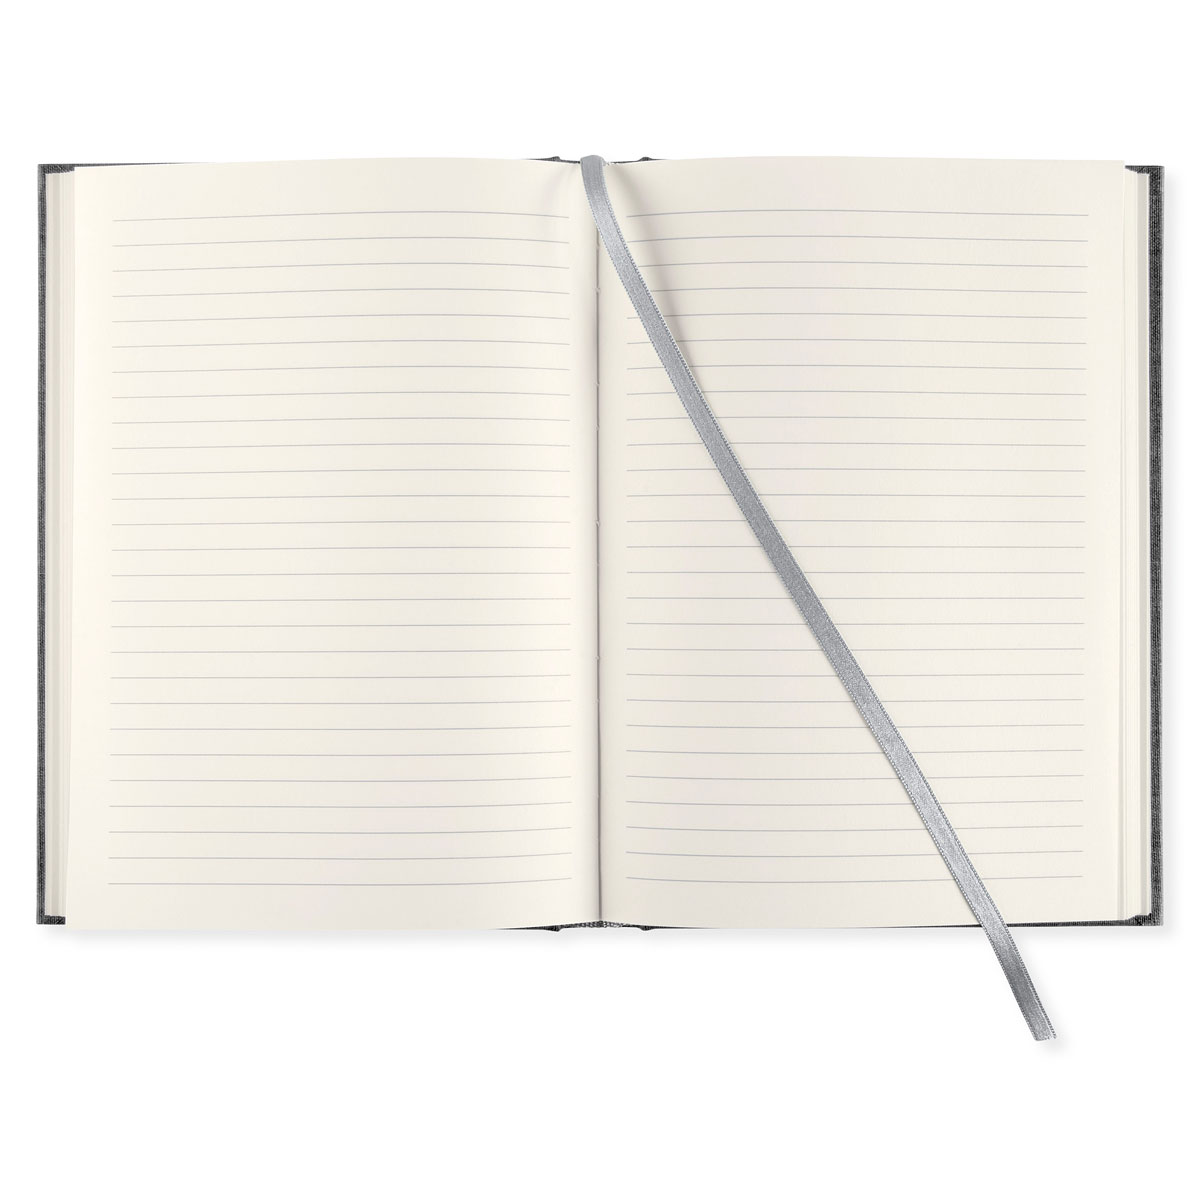 Notebook A5 Ruled Graphite in the group Paper & Pads / Note & Memo / Notebooks & Journals at Pen Store (128470)